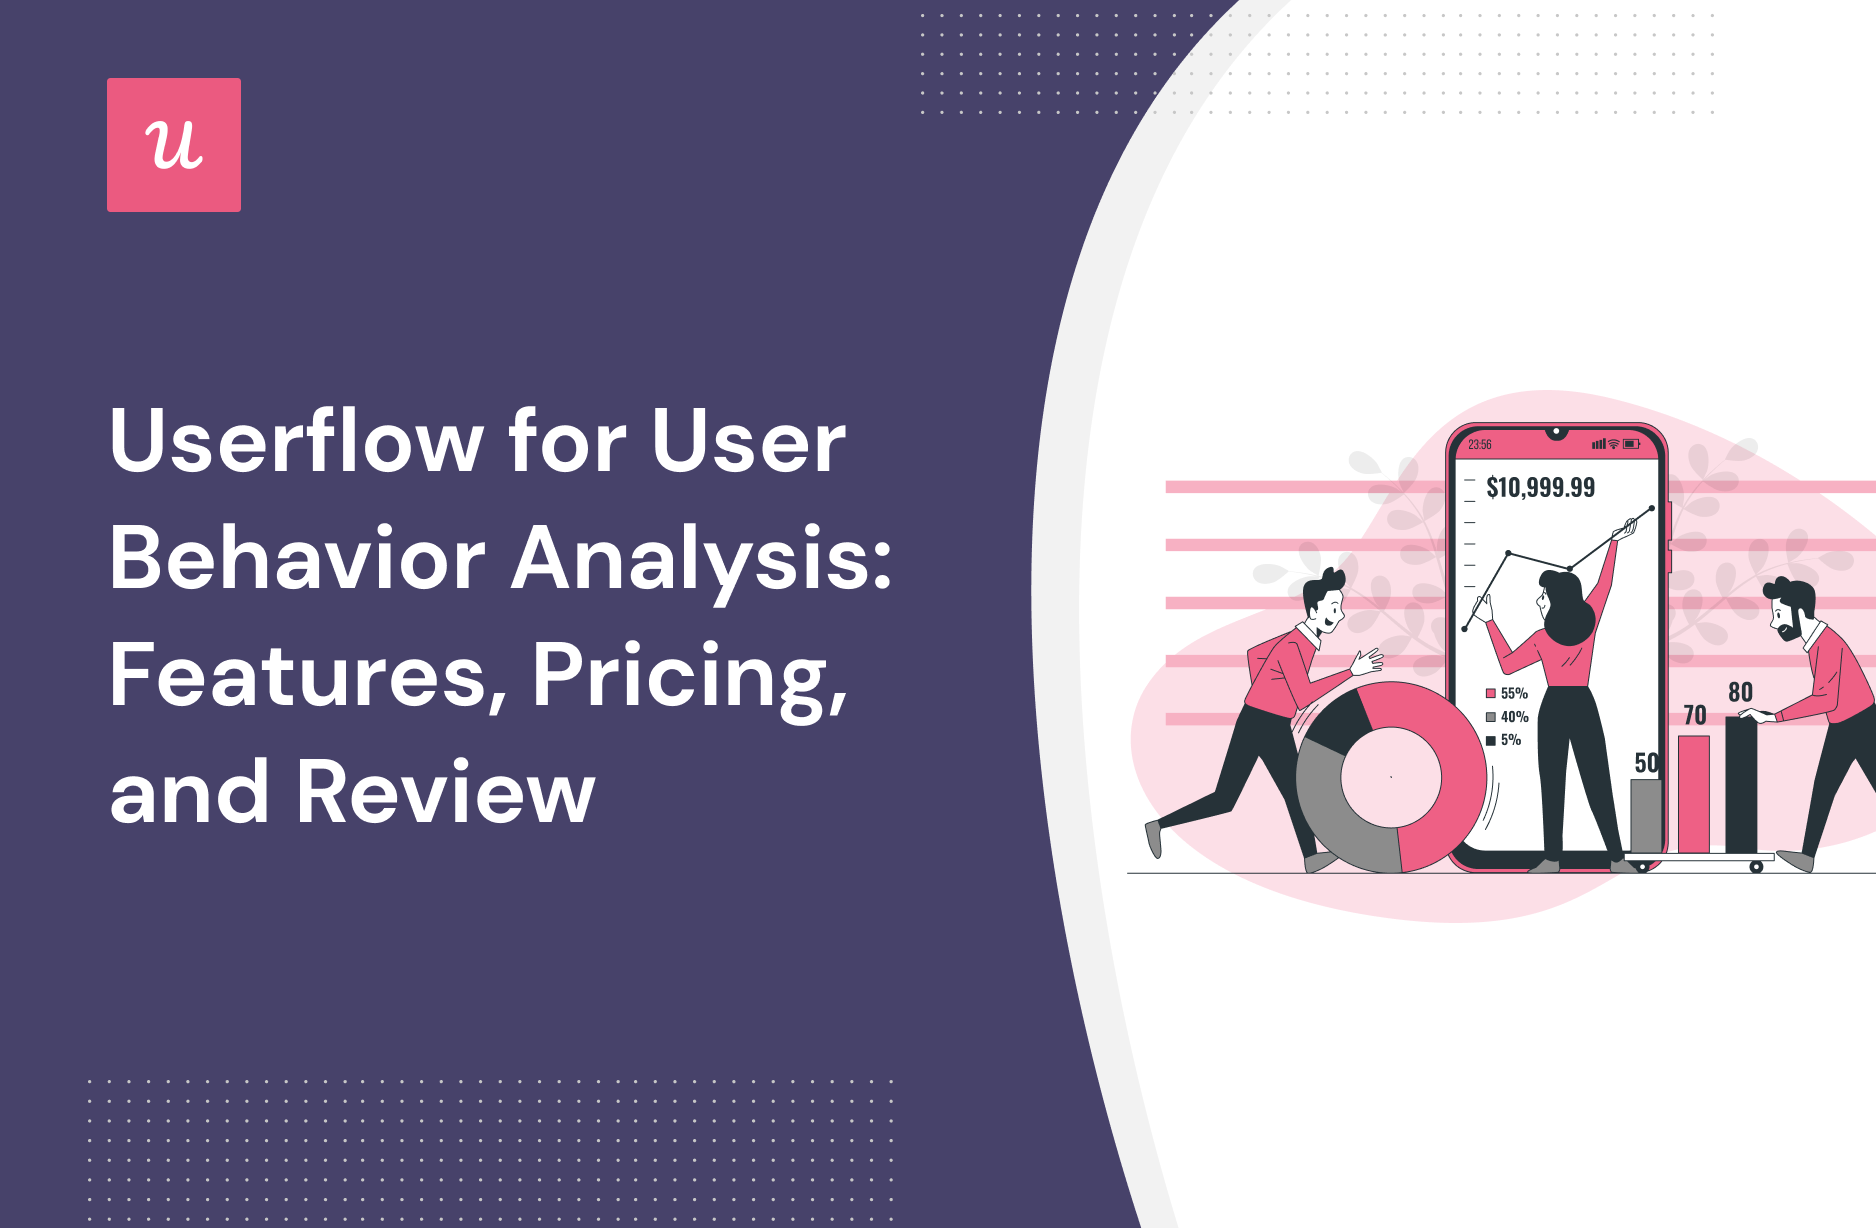 Userflow for User Behavior Analysis: Features, Pricing, and Review